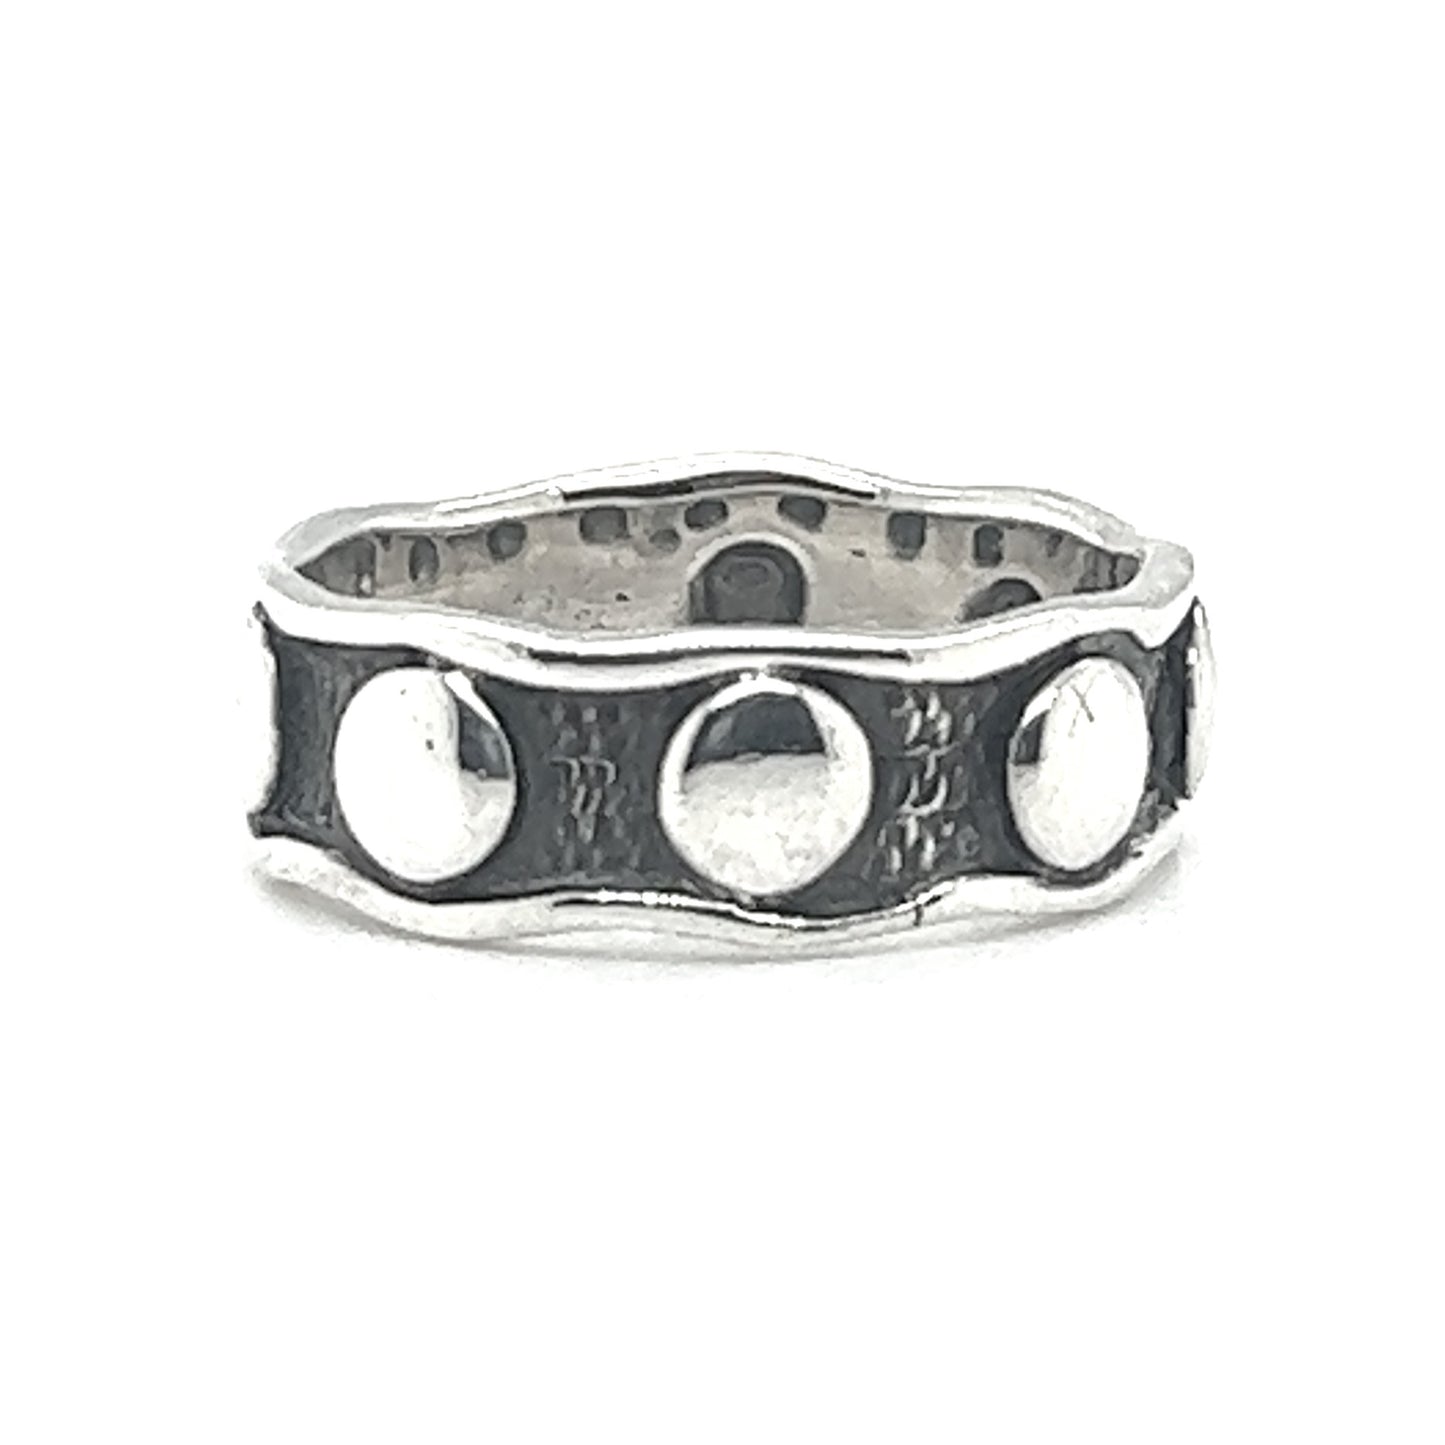 An Edgy Curvy Band with Circle Pattern, offering an exclusive style.